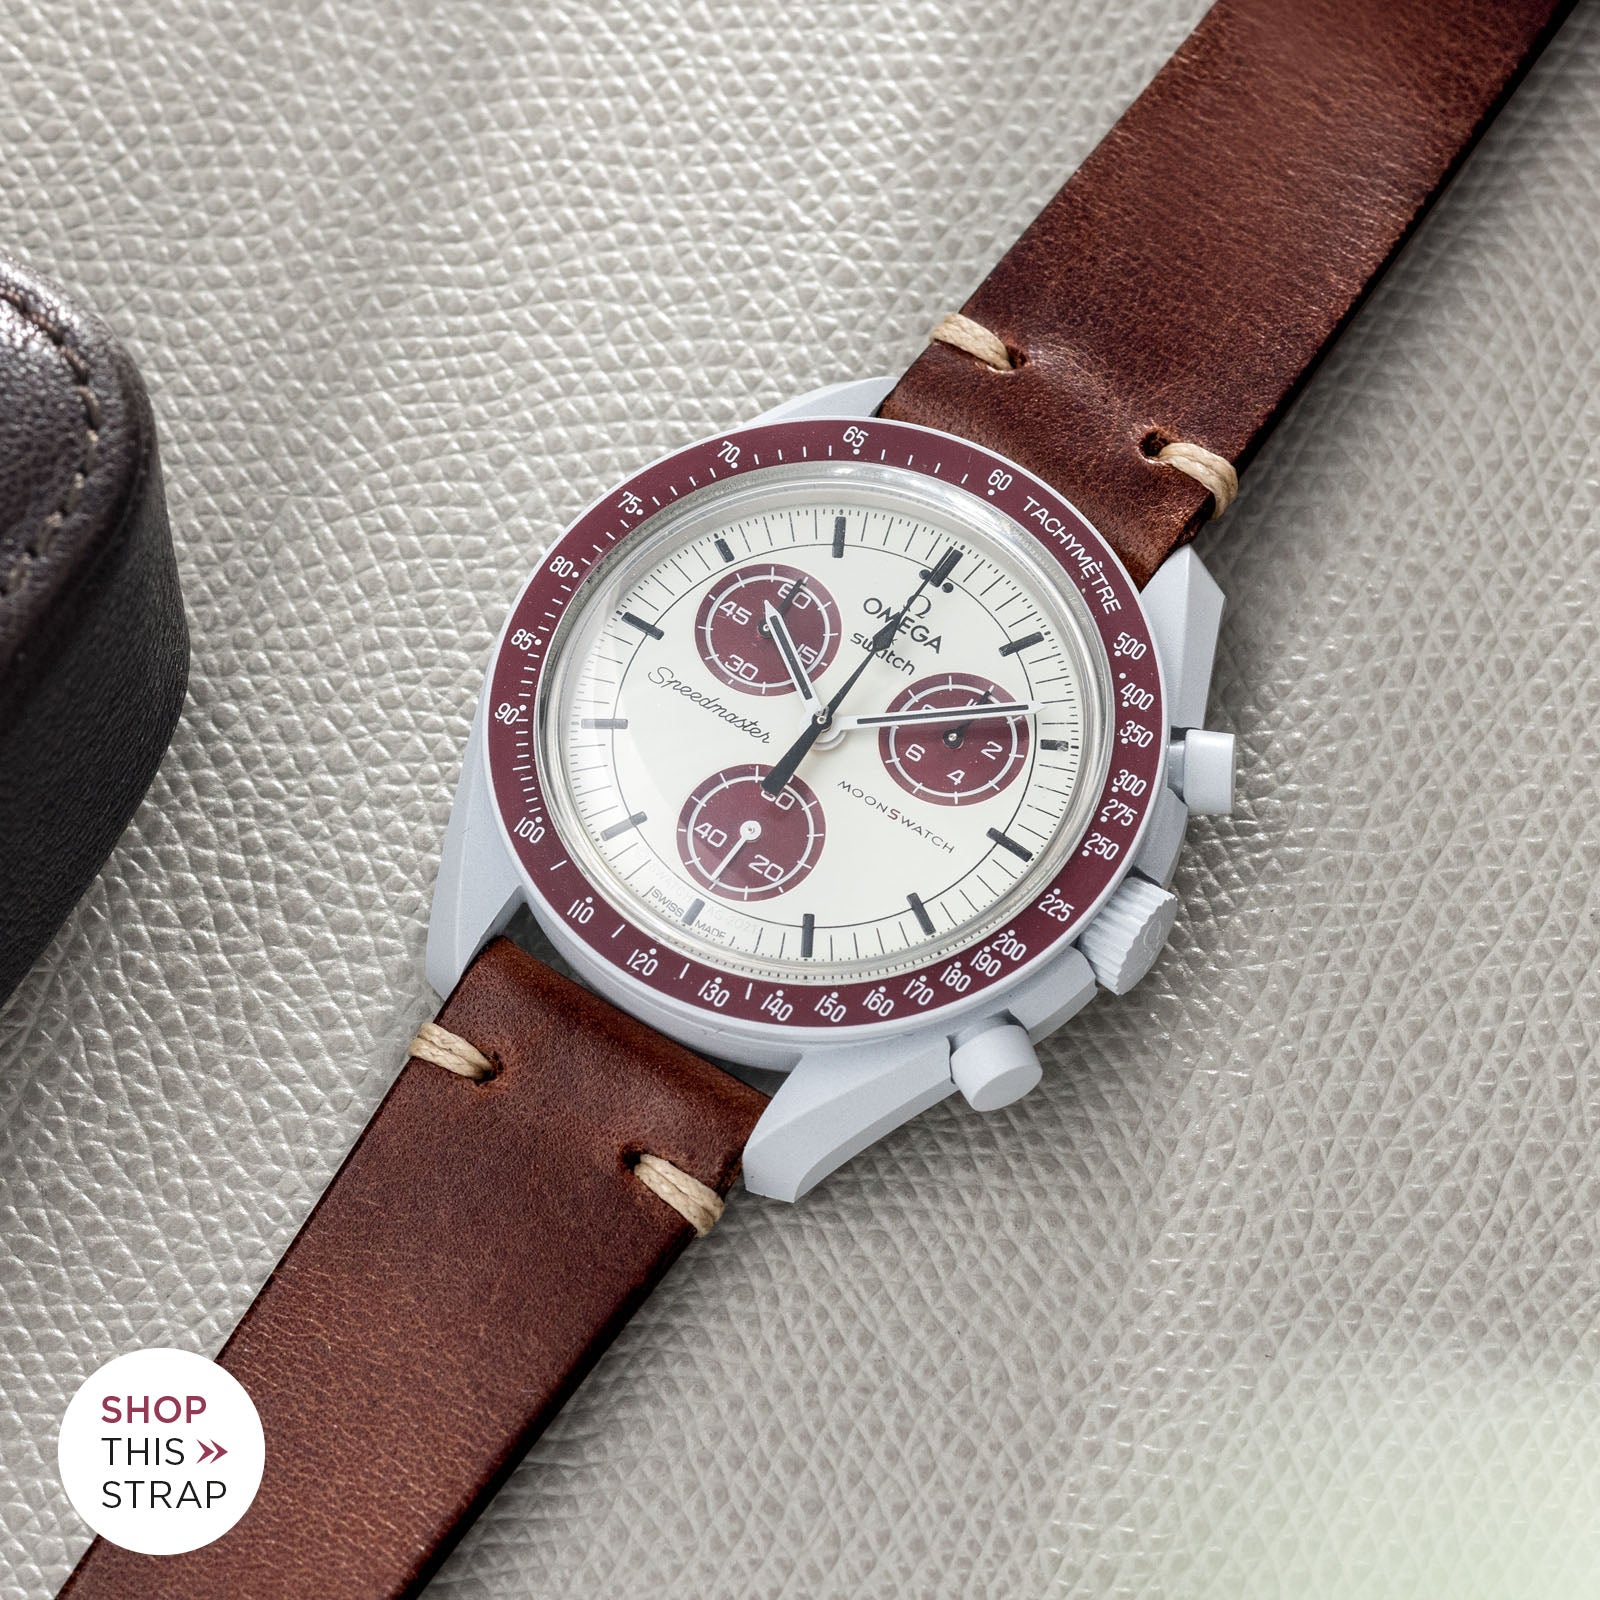 Bulang and Sons_Strapguide_Swatch x Omega Mission to Pluto_Siena Brown Leather Watch Strap